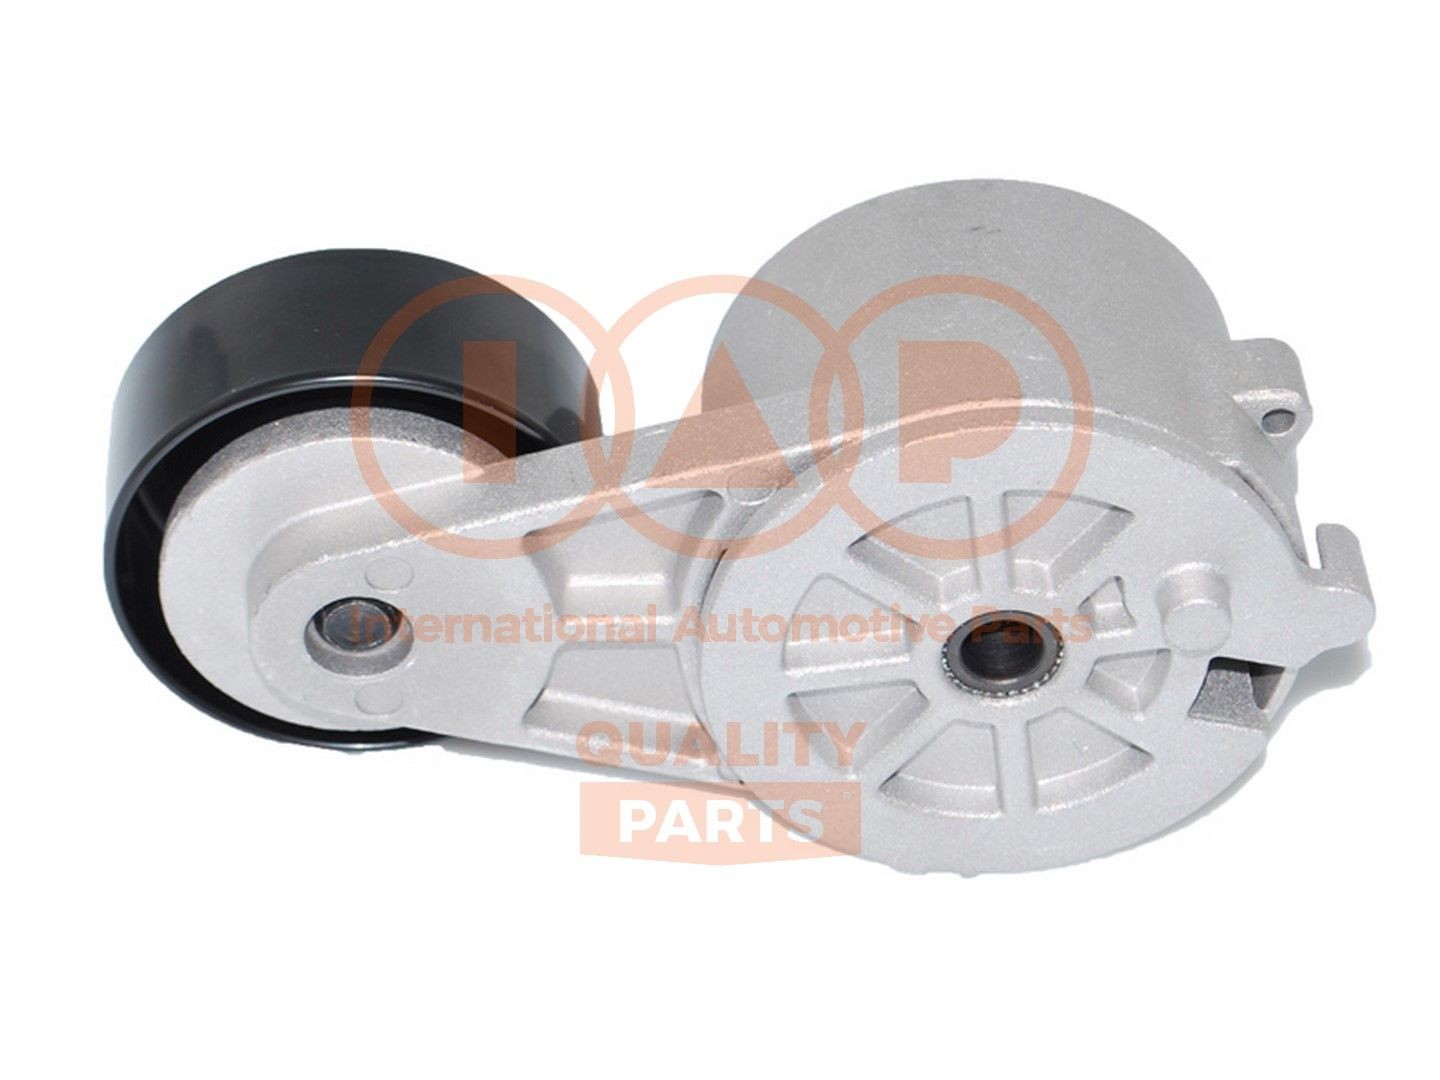 IAP QUALITY PARTS Deflection / Guide Pulley, v-ribbed belt 127-07002